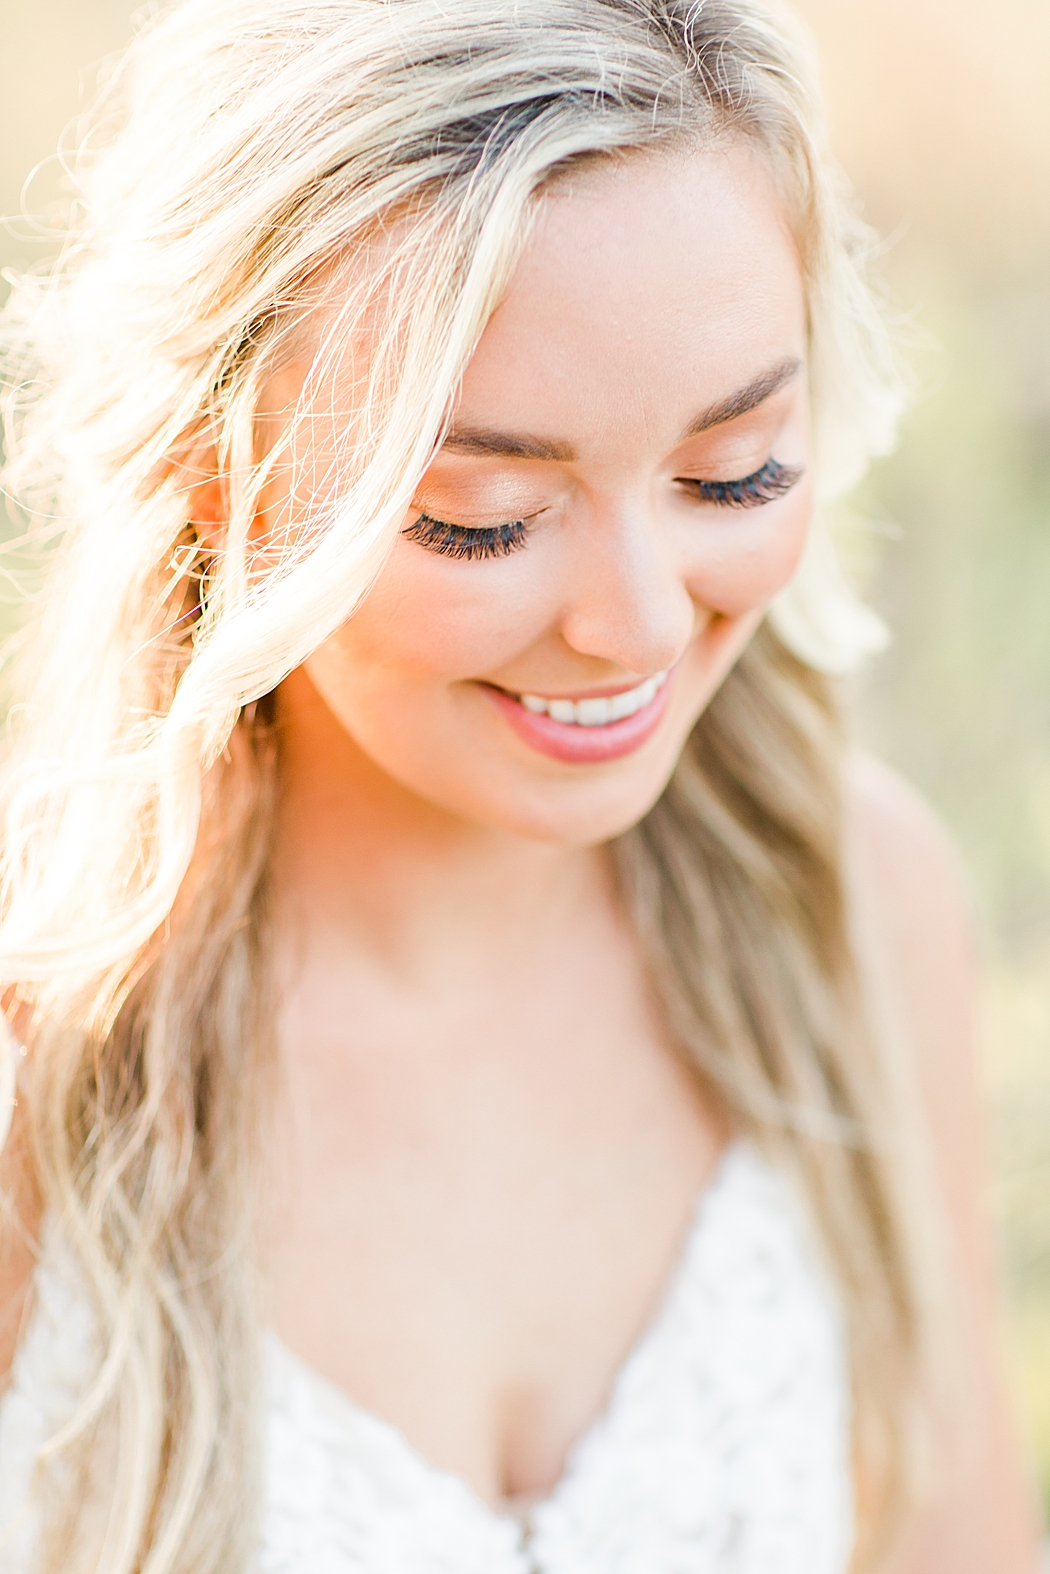 Summer Bridal Session at Contigo Ranch in Frederickburg Texas by Allison Jeffers Photography 0027